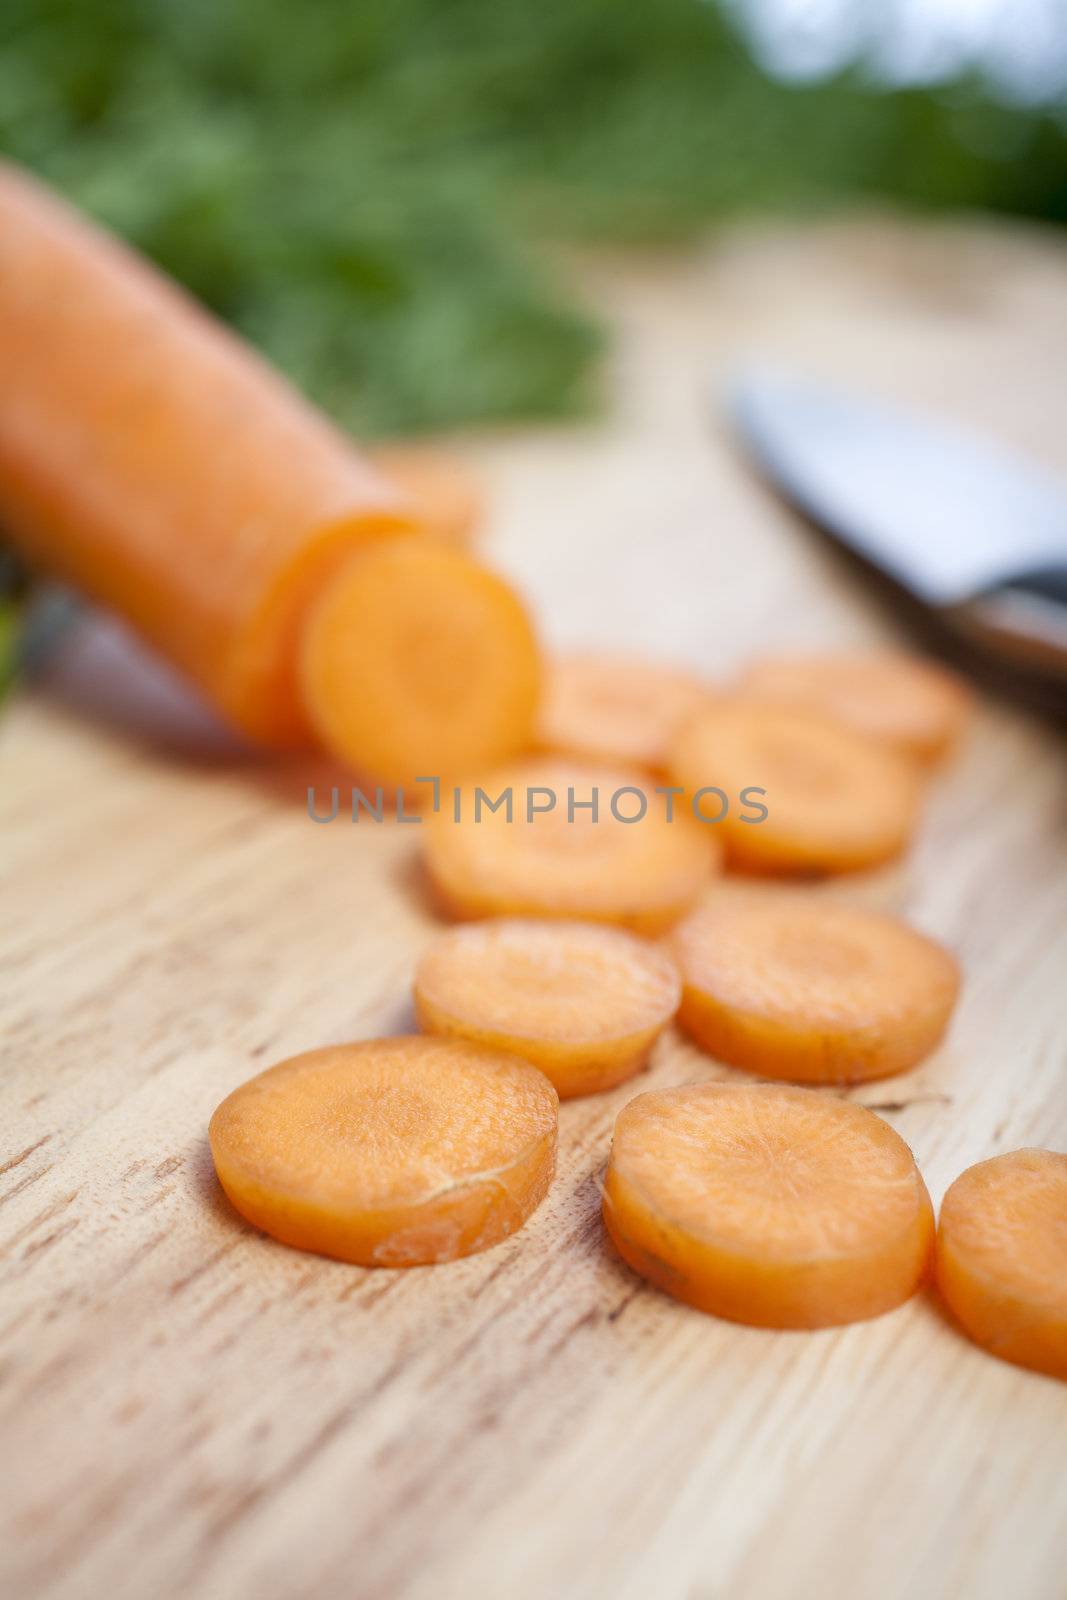 Fresh organic carrots on a wooden chopping board with knife